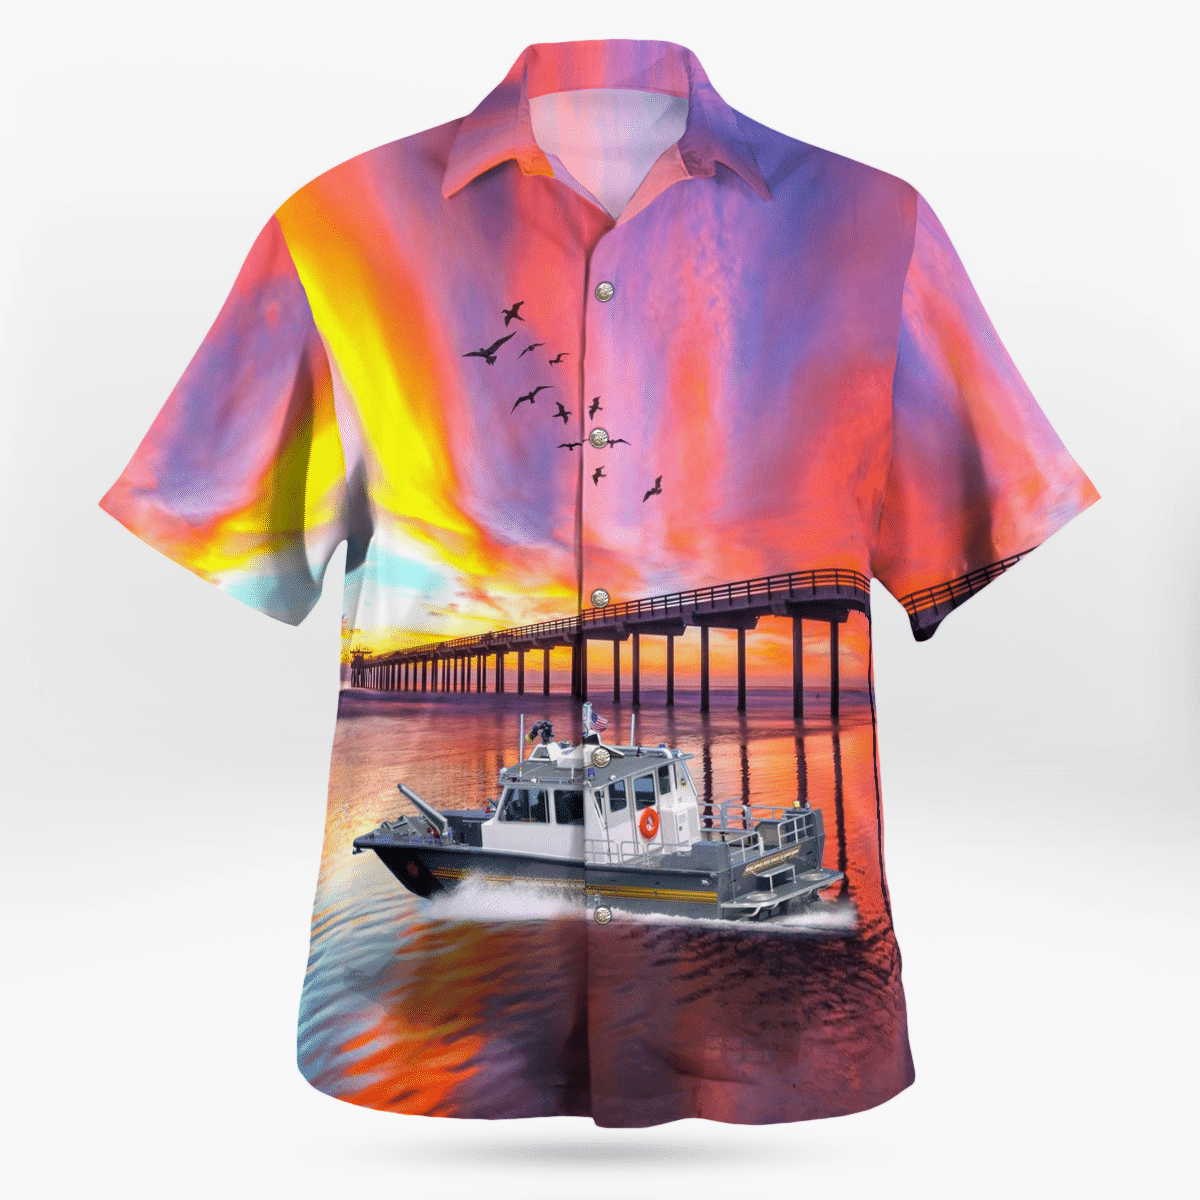 If you are in need of a new summertime look, pick up this Hawaiian shirt 2